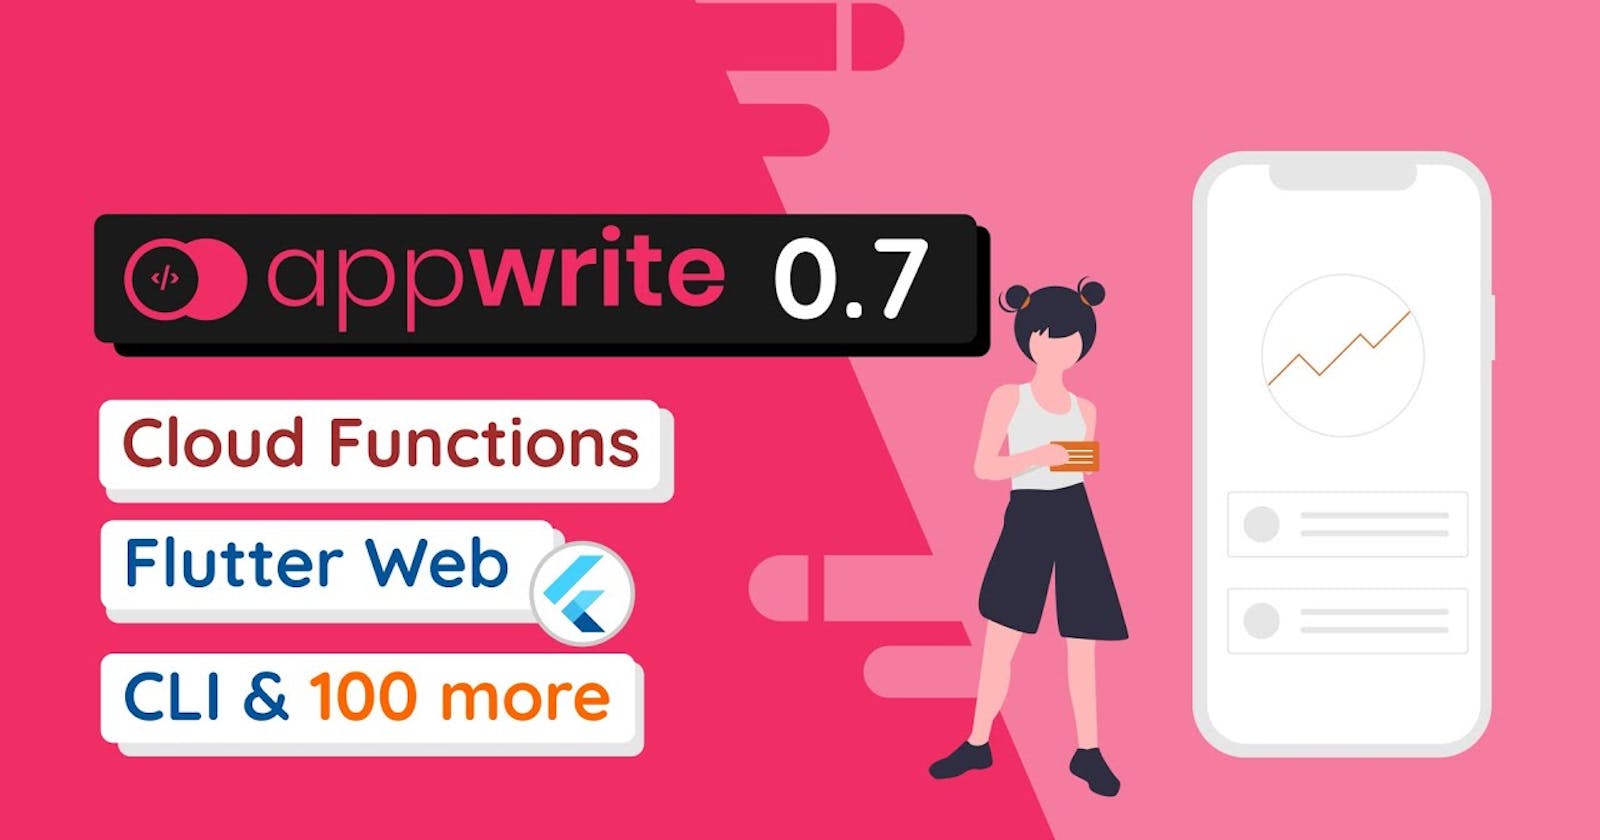 What's new in Appwrite 0.7